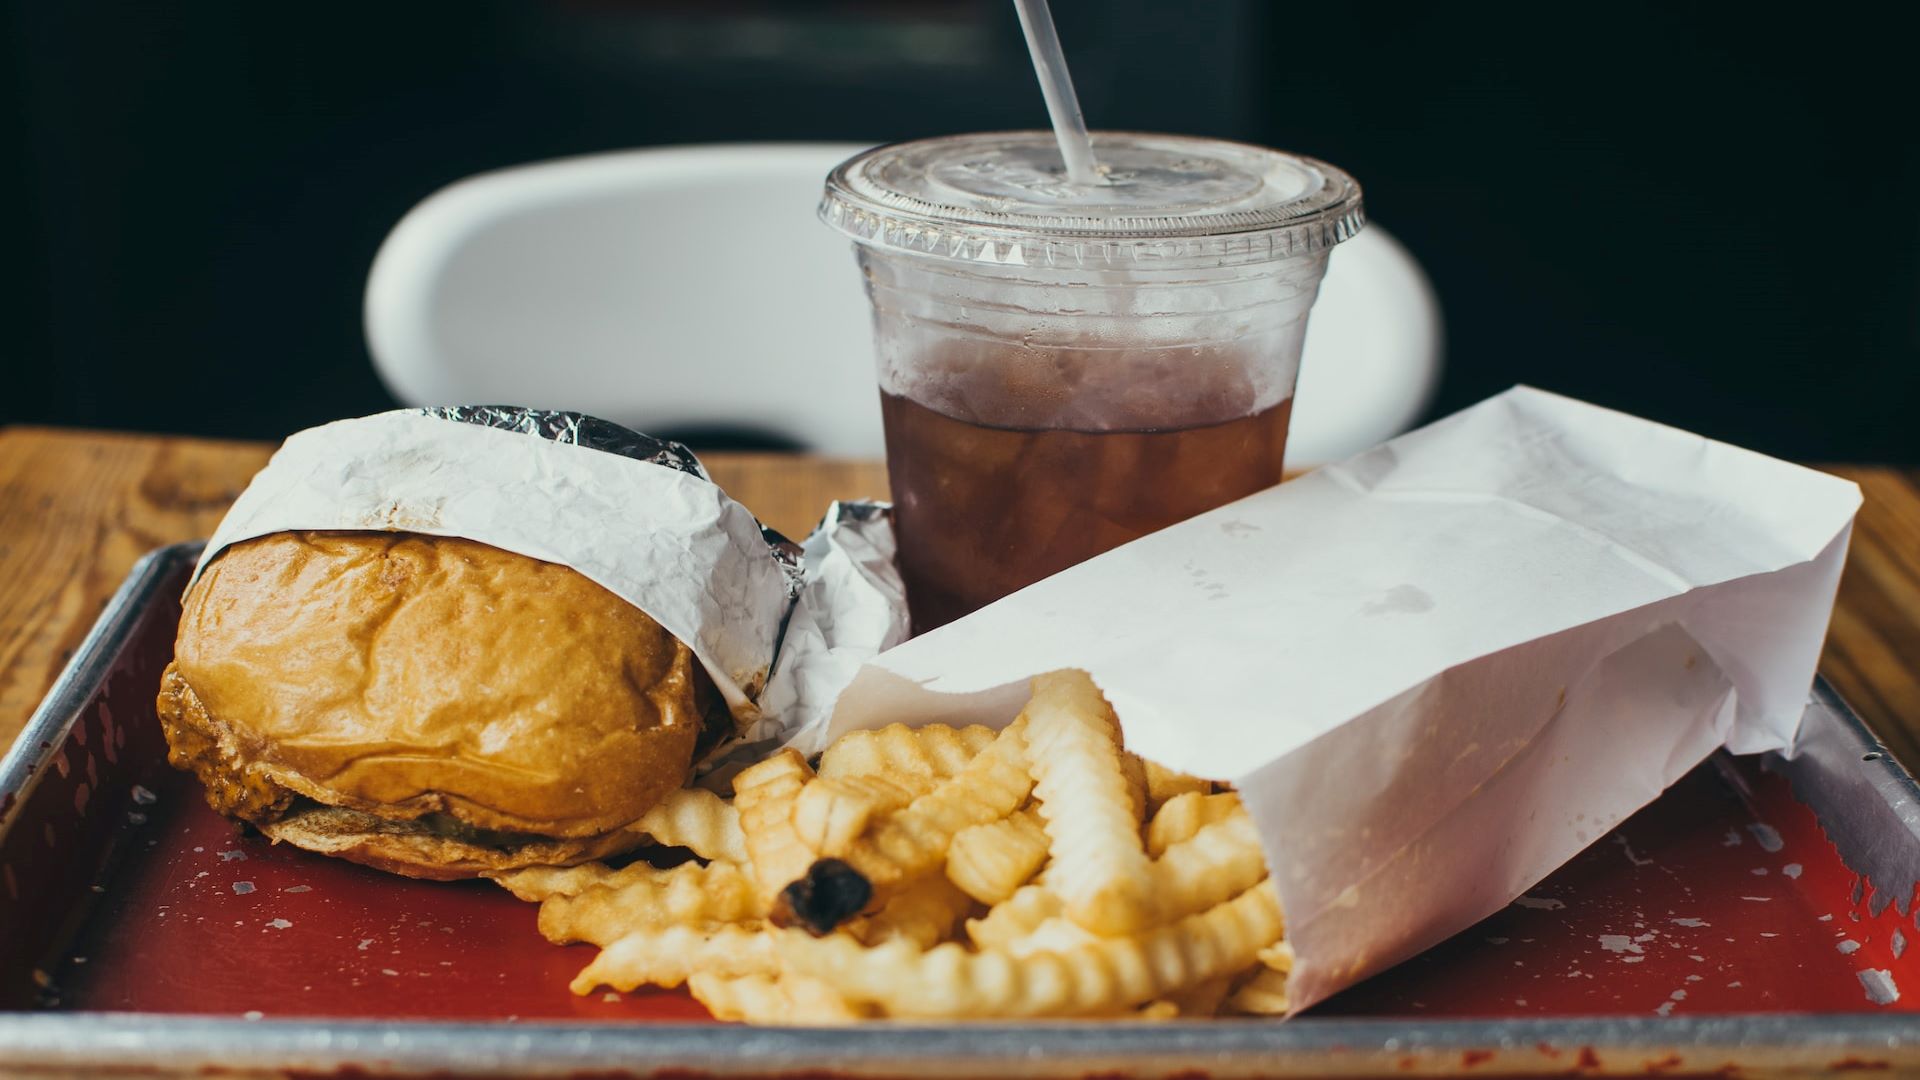 An image of a tray of fast food illustrates what not to eat before a flight.